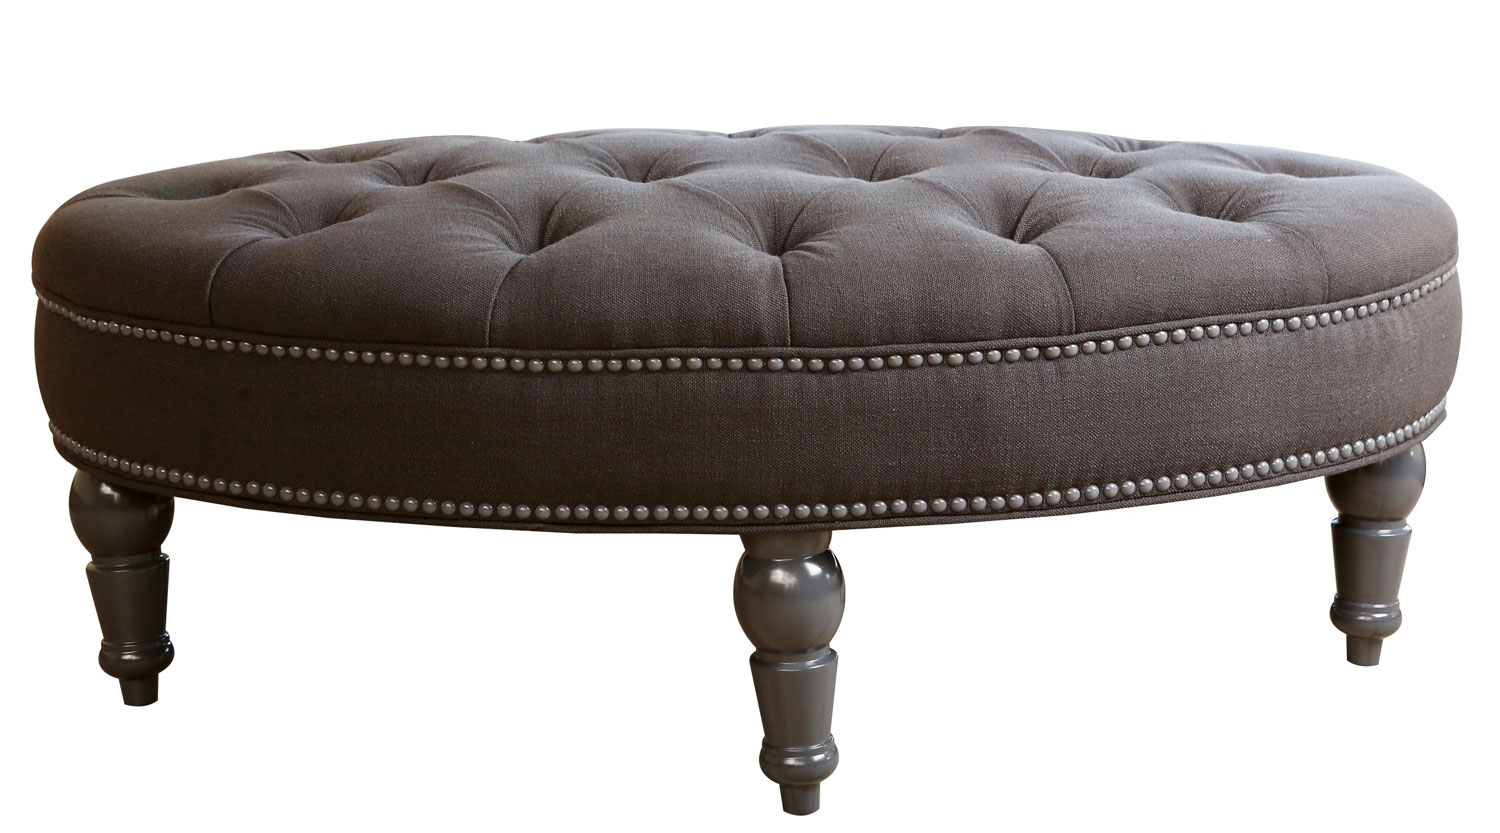 Abbyson Living Clairemont Tufted Linen Nailhead-Trim Oval Ottoman - Grey